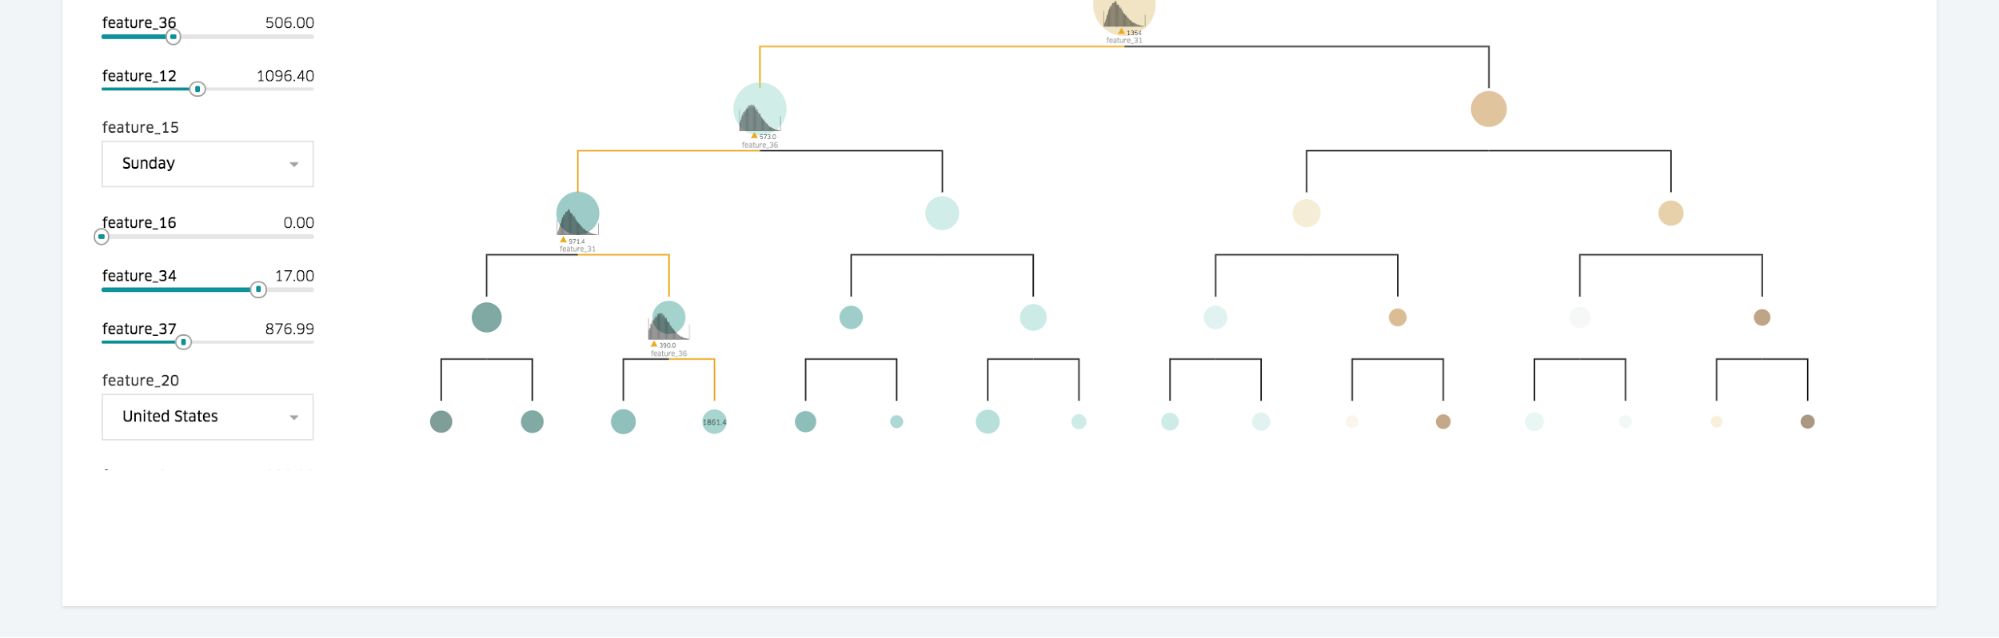 Tree models can be explored with powerful tree visualizations